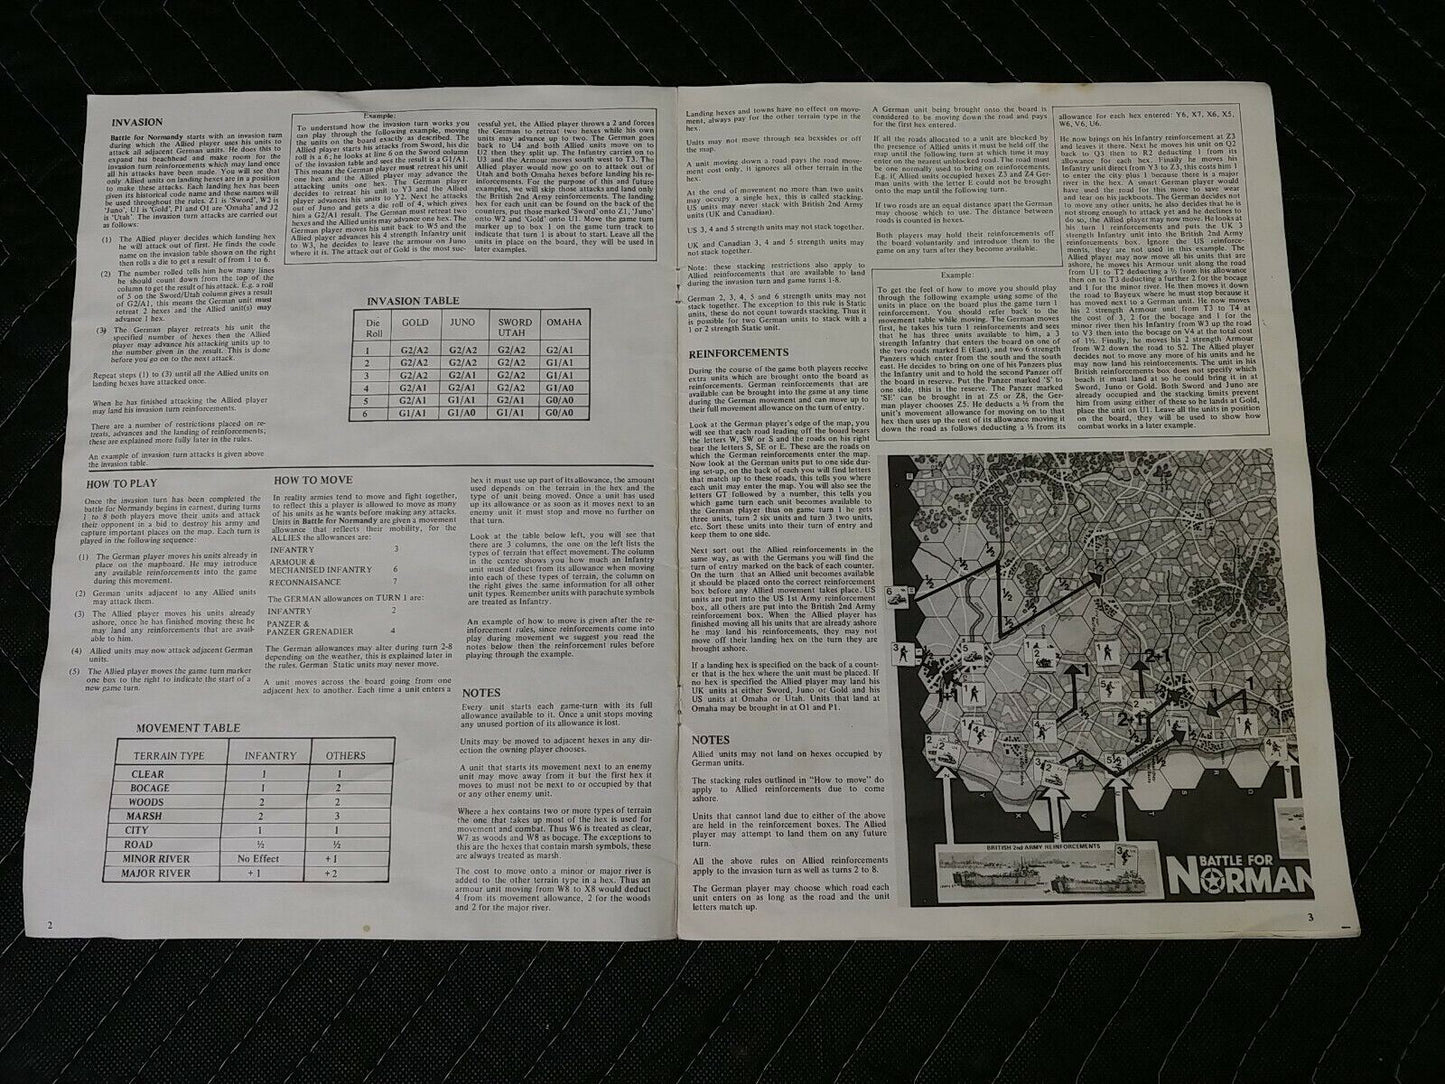 Attactix 1982 - Breakout from the Beaches - June 1944 Battle for Normandy